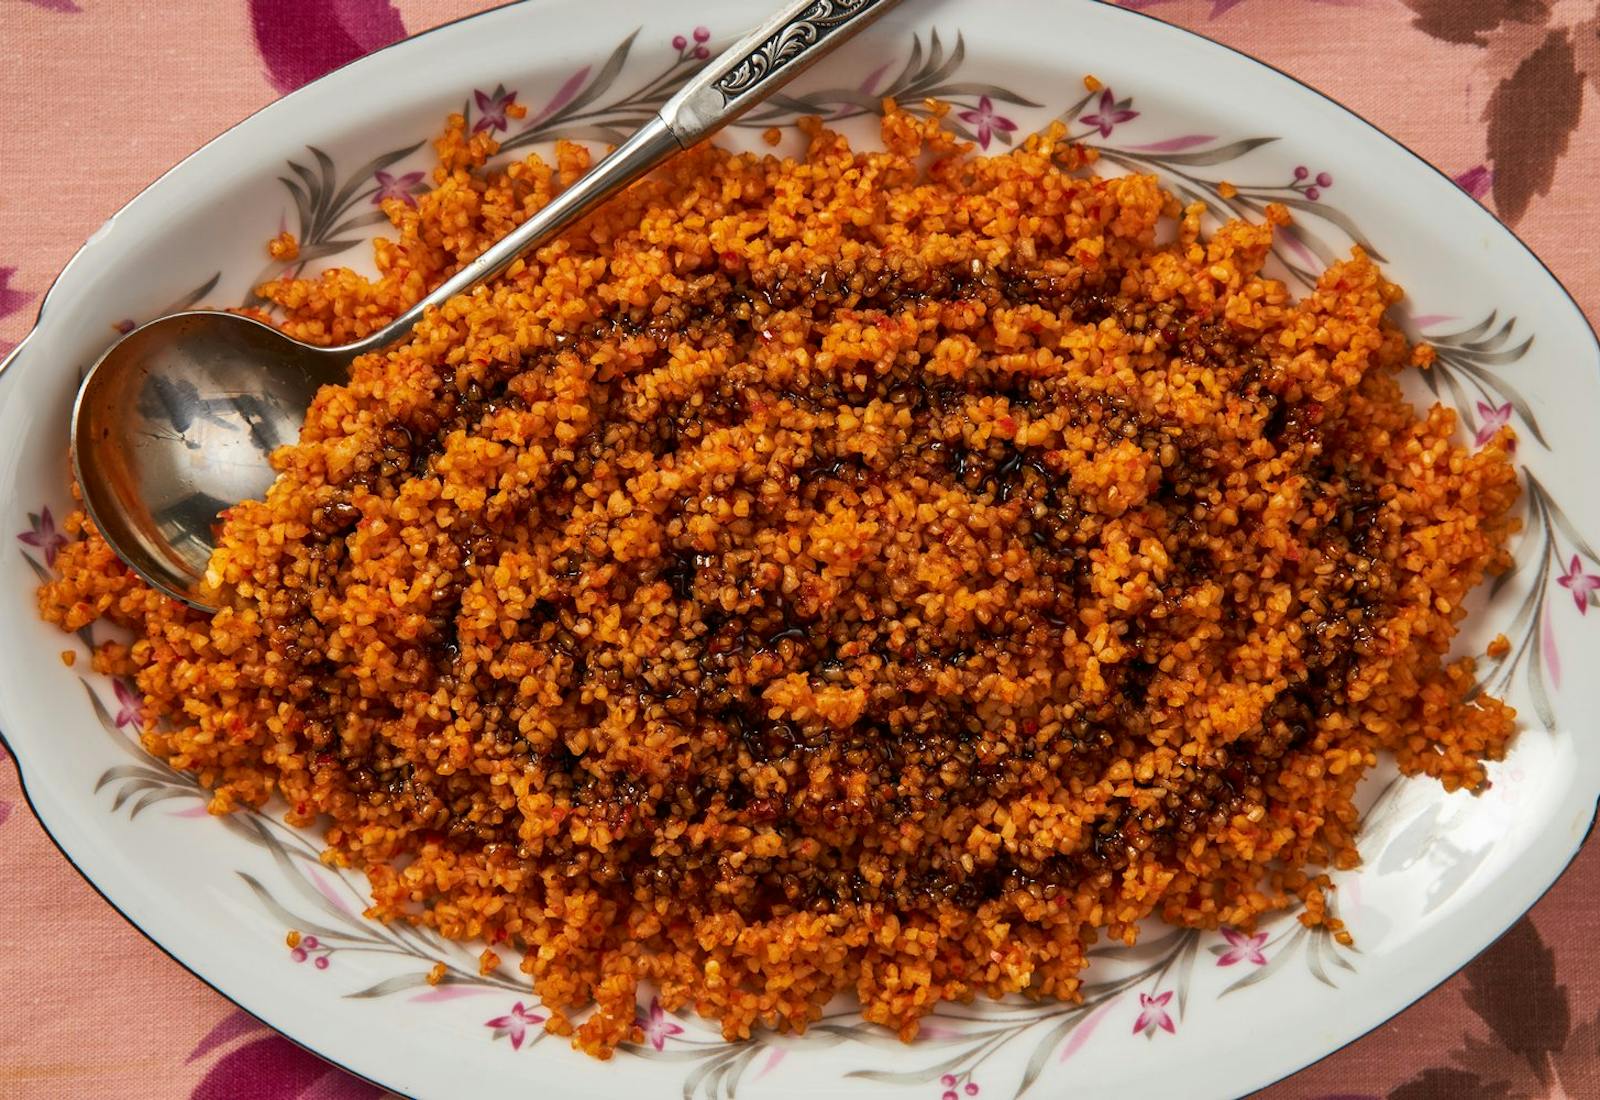 Bulgur muhammara with drizzle of pomegranate molasses in large serving dish atop pink tablecloth.